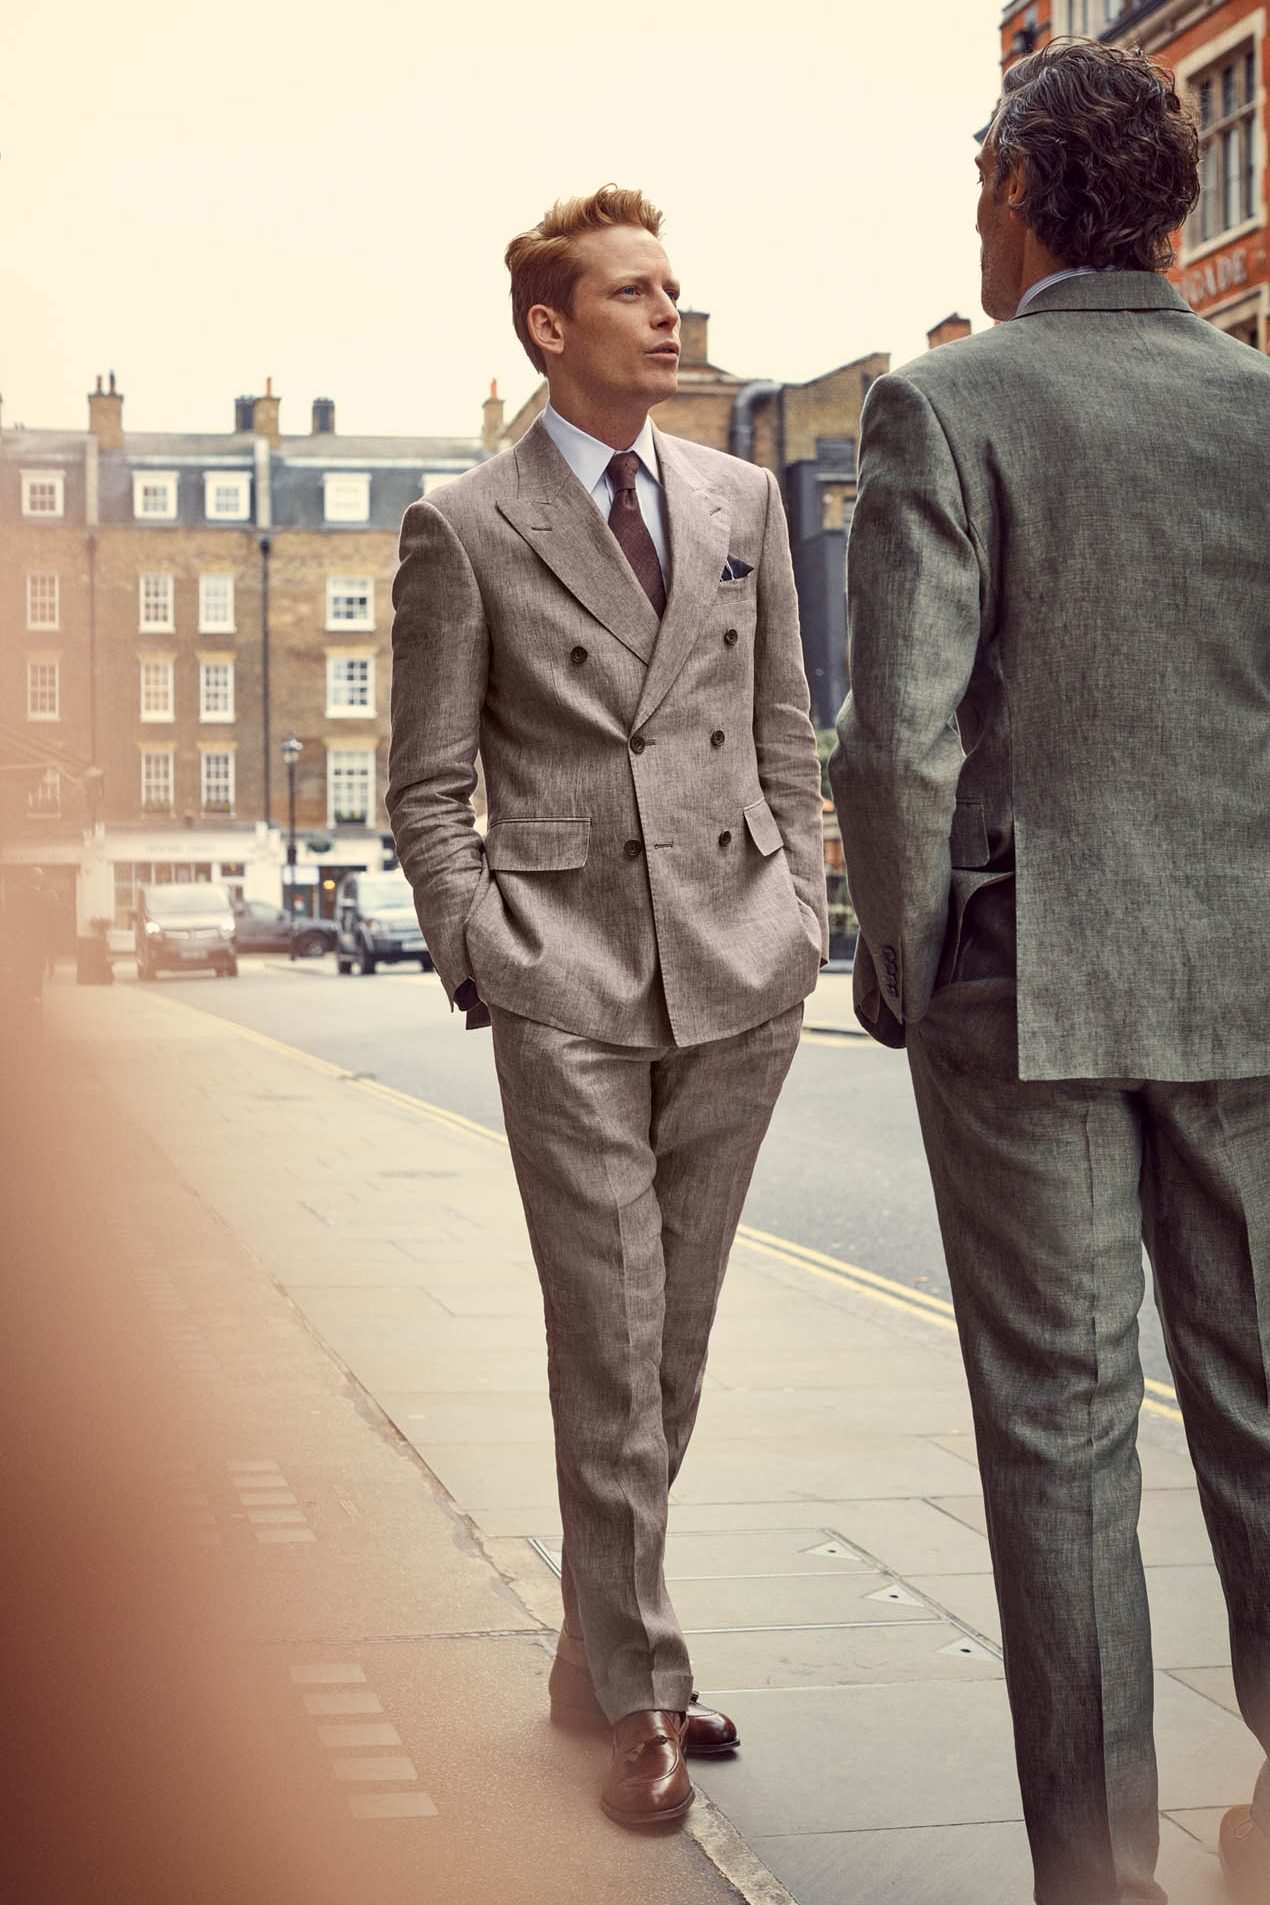 English Cut — Men About Town | The Cork